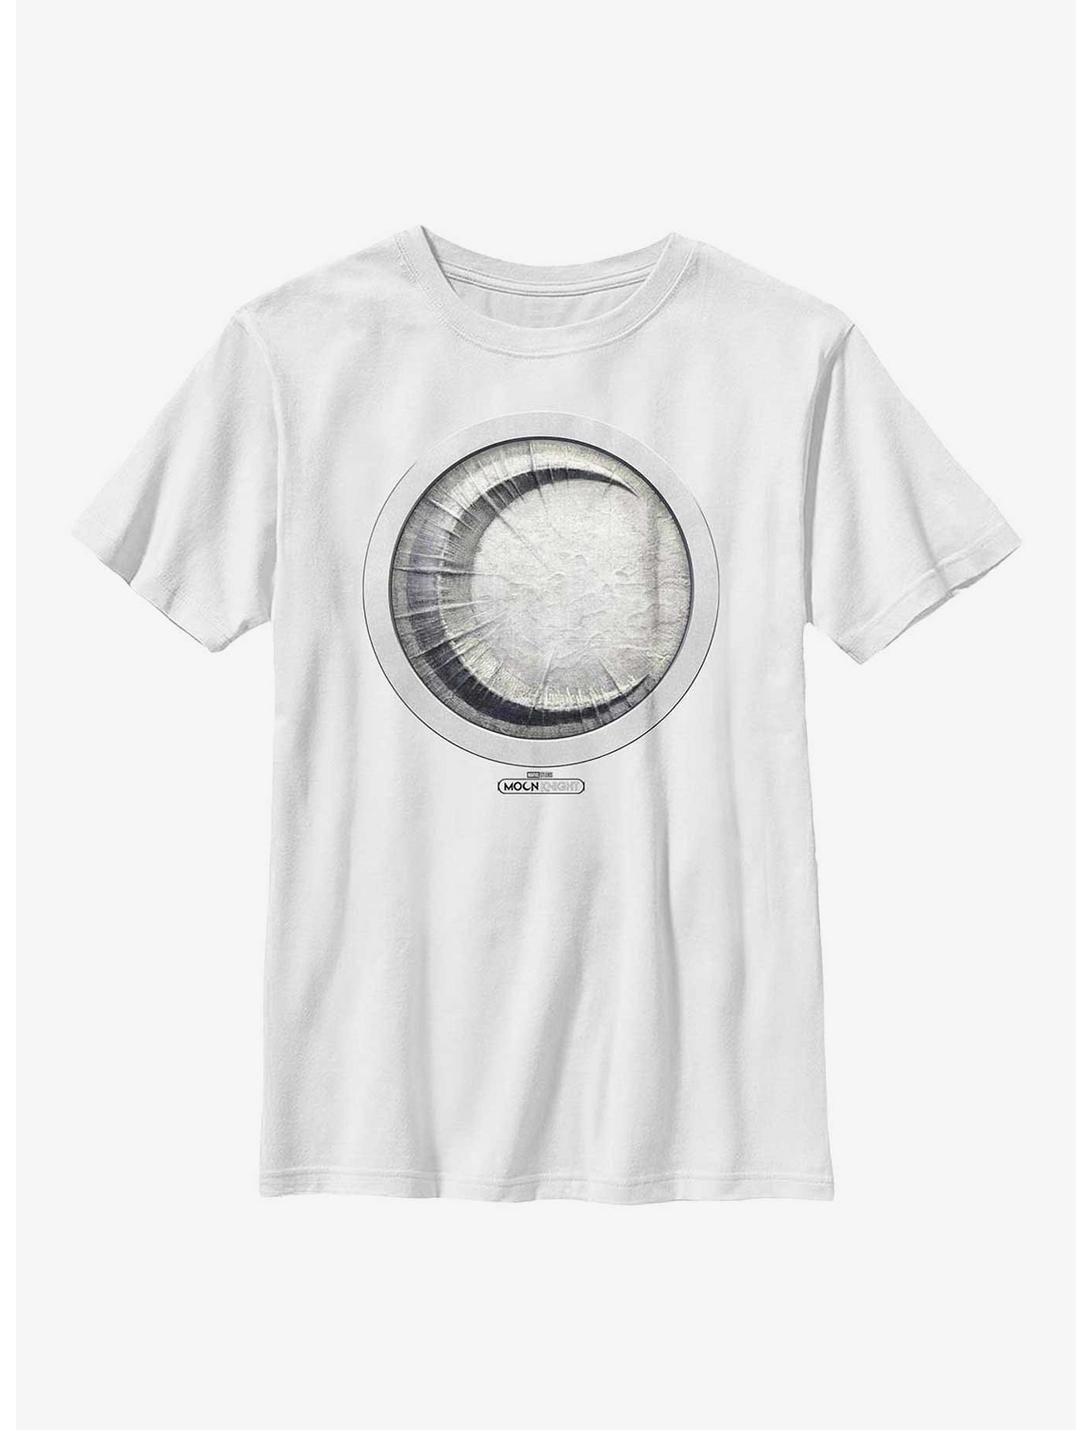 Marvel Moon Knight Silver Icon Youth T-Shirt, WHITE, hi-res